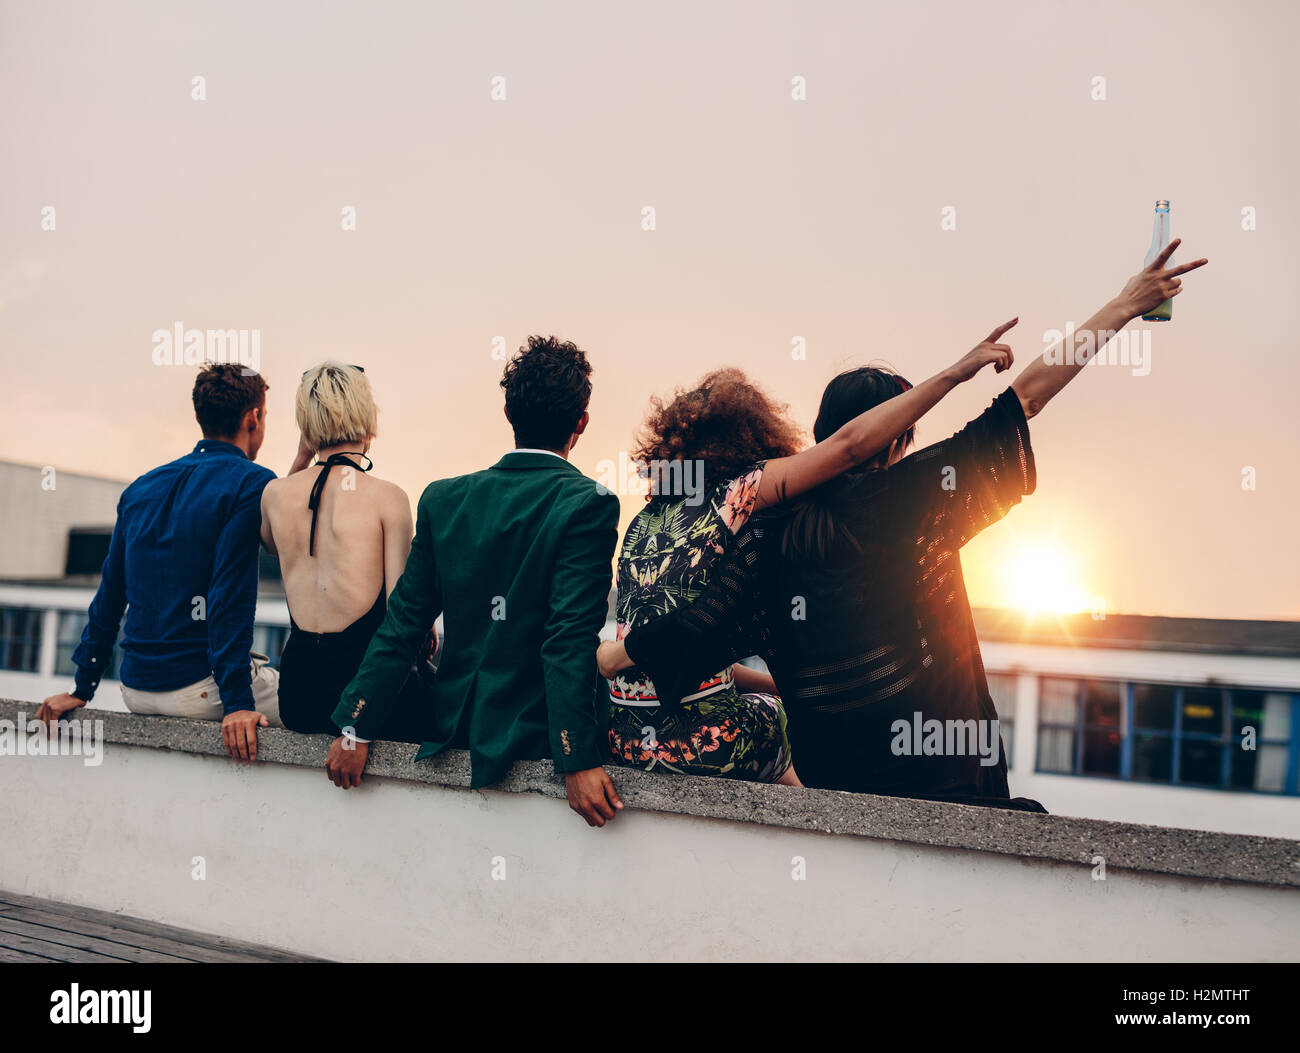 Group of friends partying on terrace with drinks. Young men and women enjoying drinks on rooftop at sunset. Stock Photo